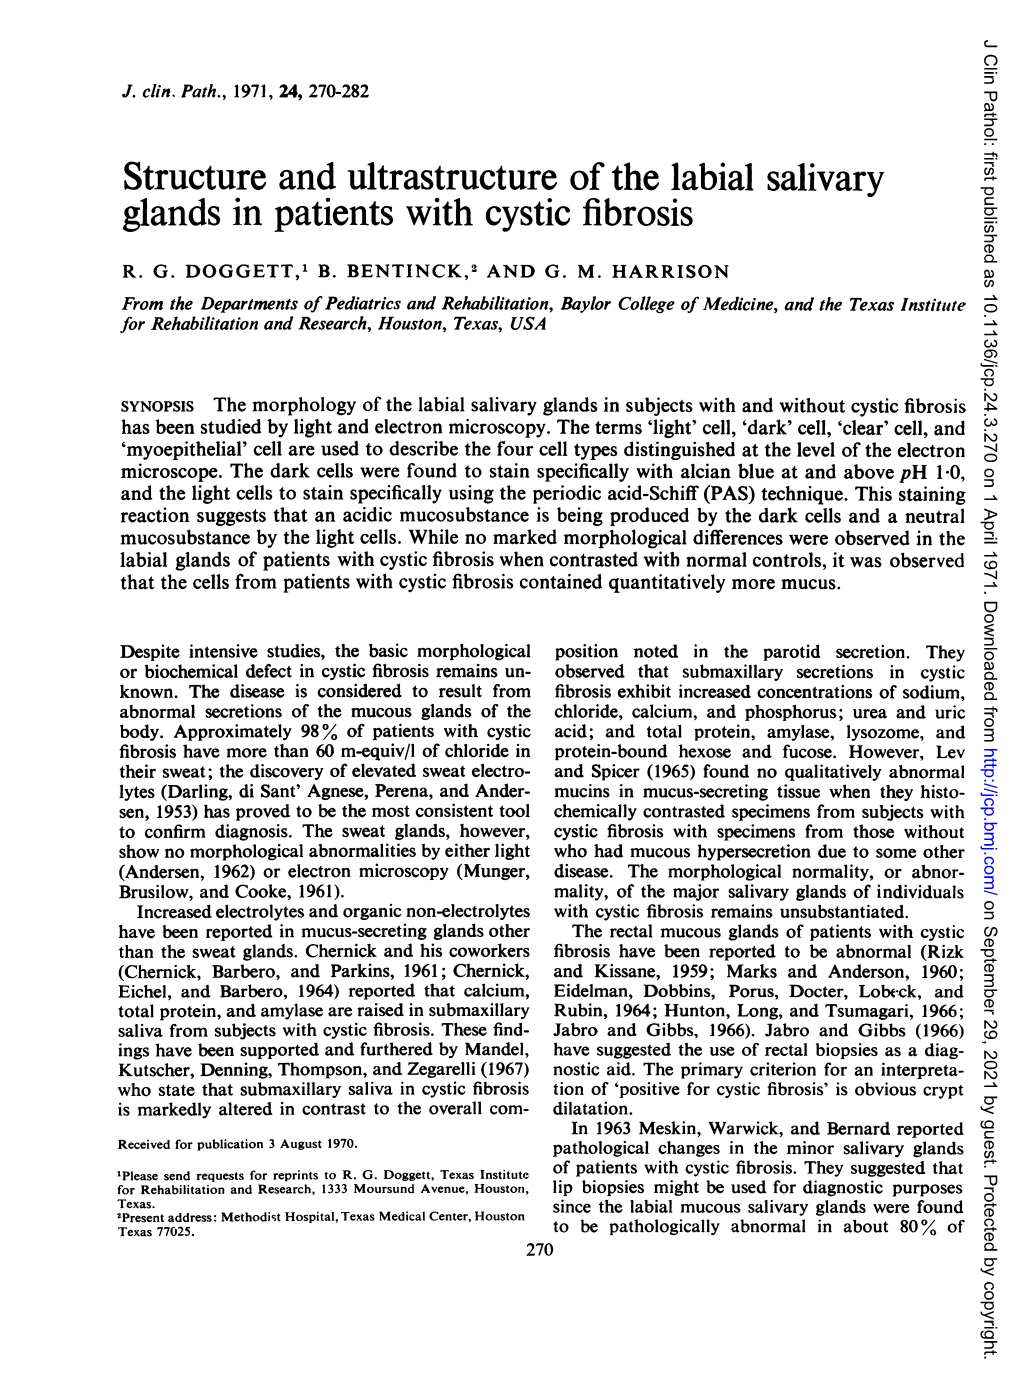 Structure and Ultrastructure of the Labial Salivary Glands in Patients with Cystic Fibrosis